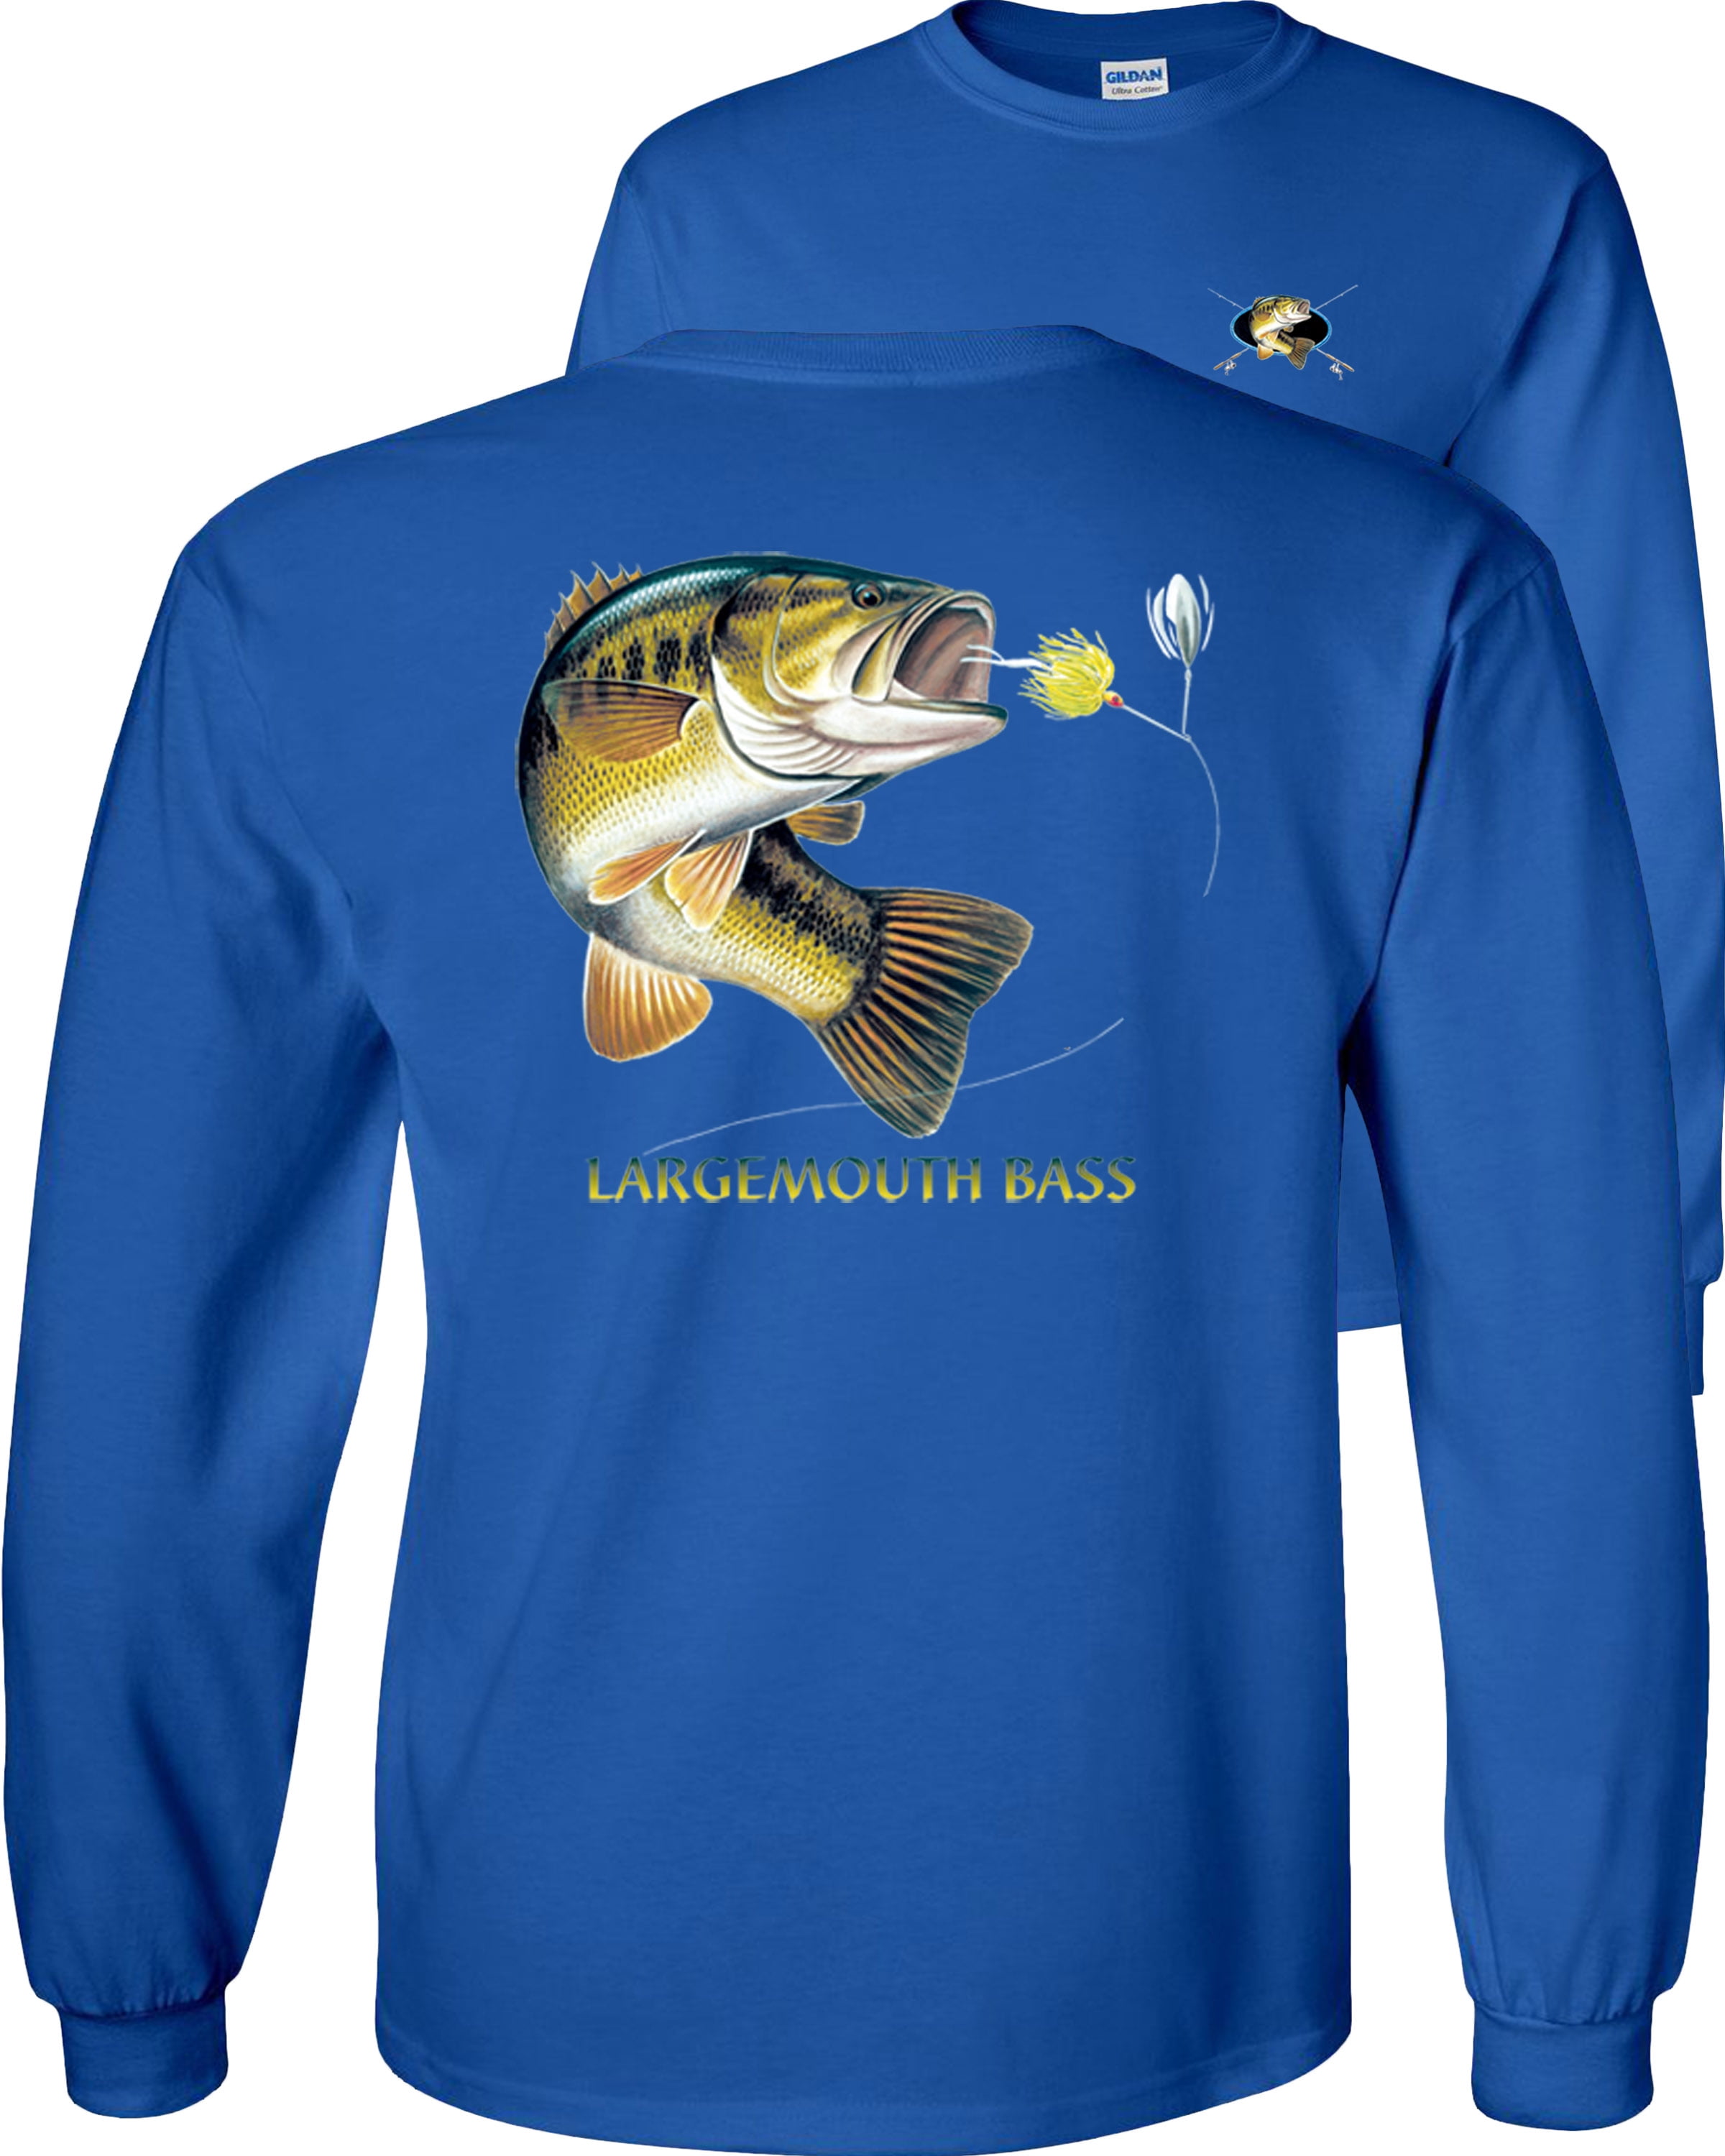 Fair Game Largemouth Bass Long Sleeve Shirt, combination profile, Fishing  Graphic Tee-Red-XL